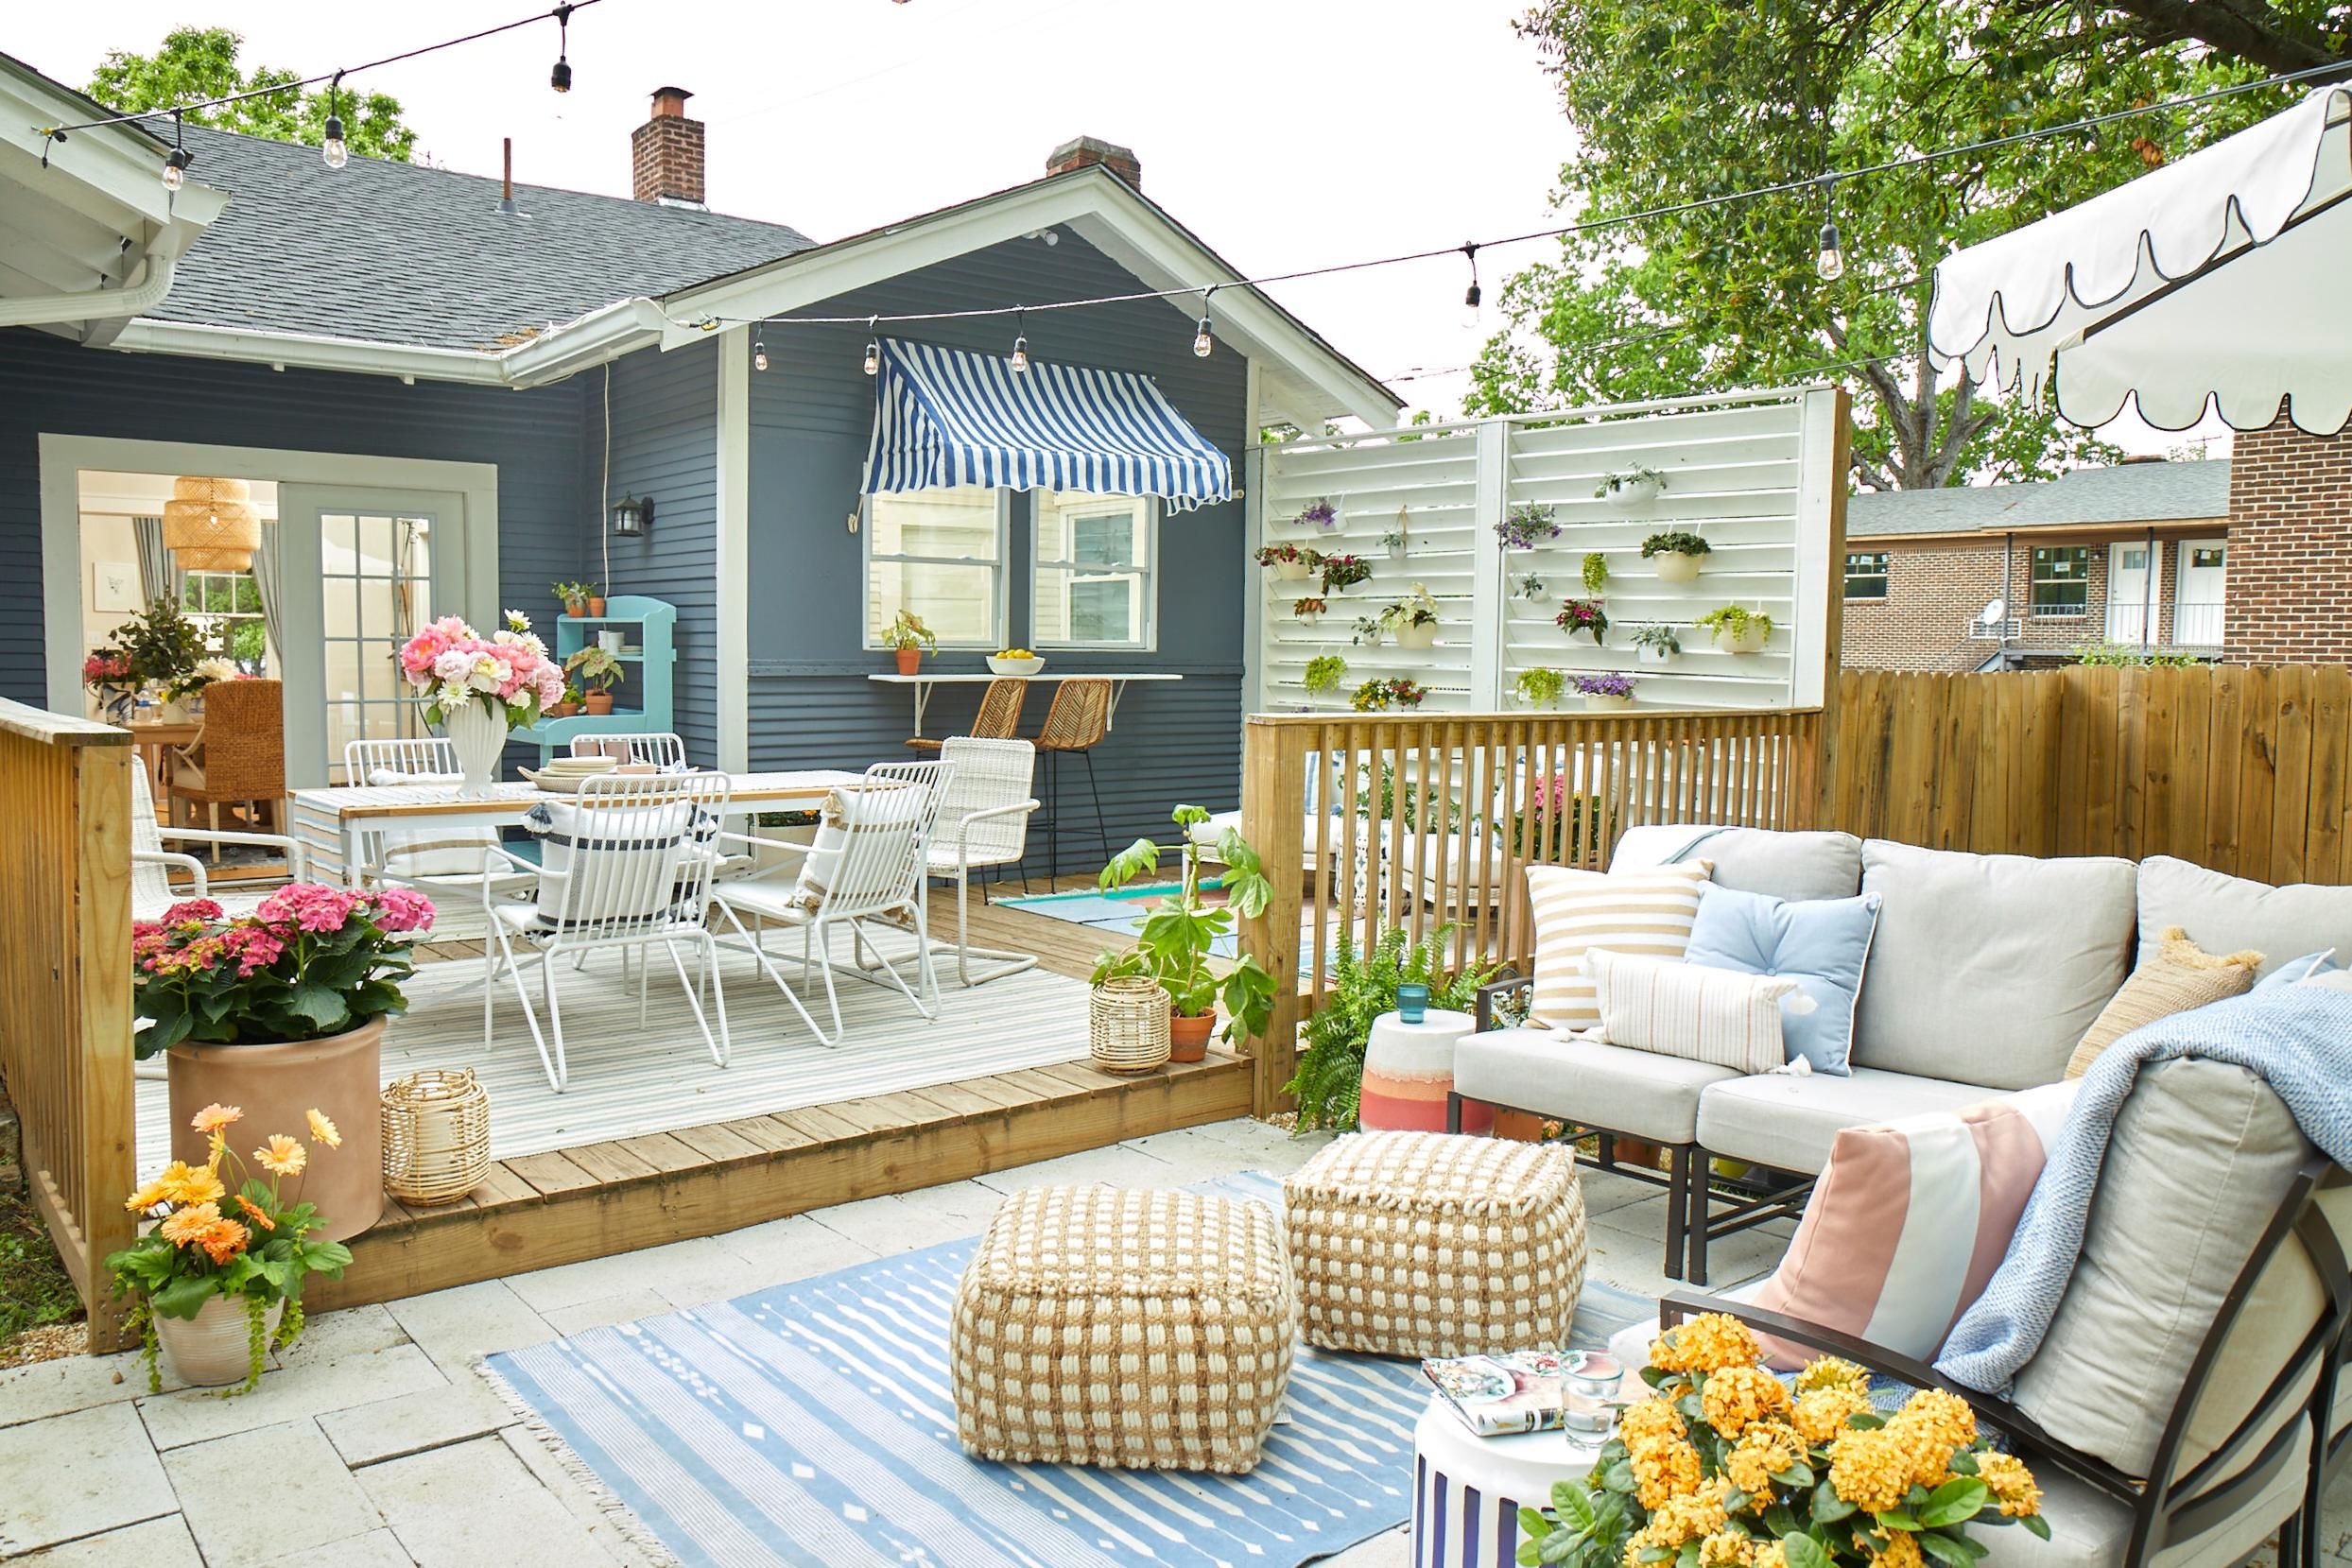 50 Best Patio And Porch Design Ideas Decorating Your Outdoor Space - Outdoor Living Patio Ideas